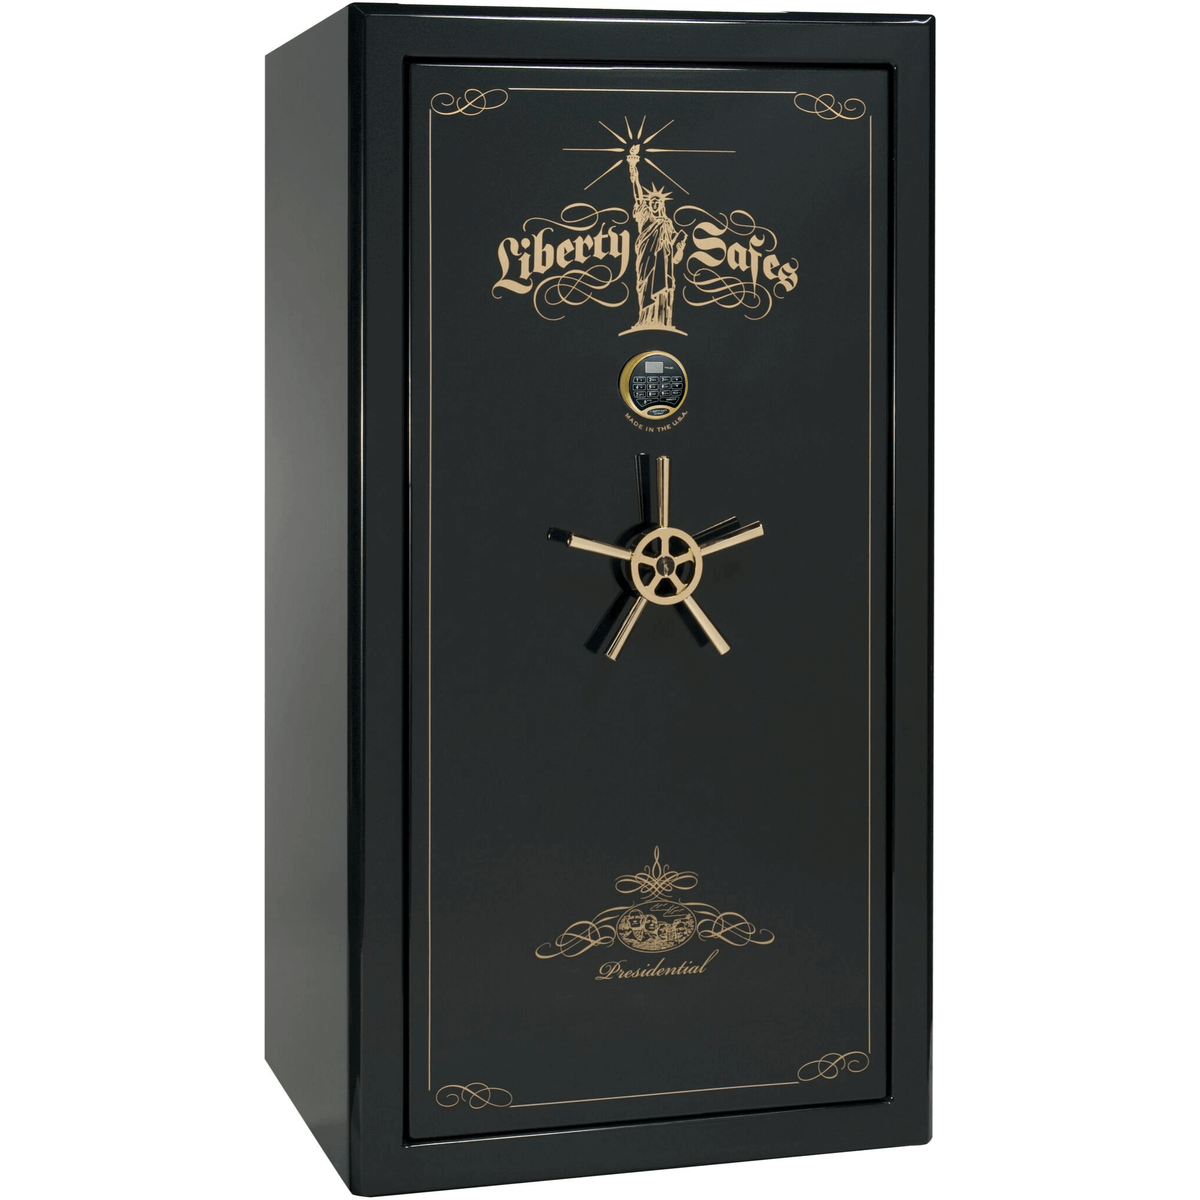 Liberty Safe Presidential 40 in Emerald Green with 24k Gold Electronic Lock, closed door.